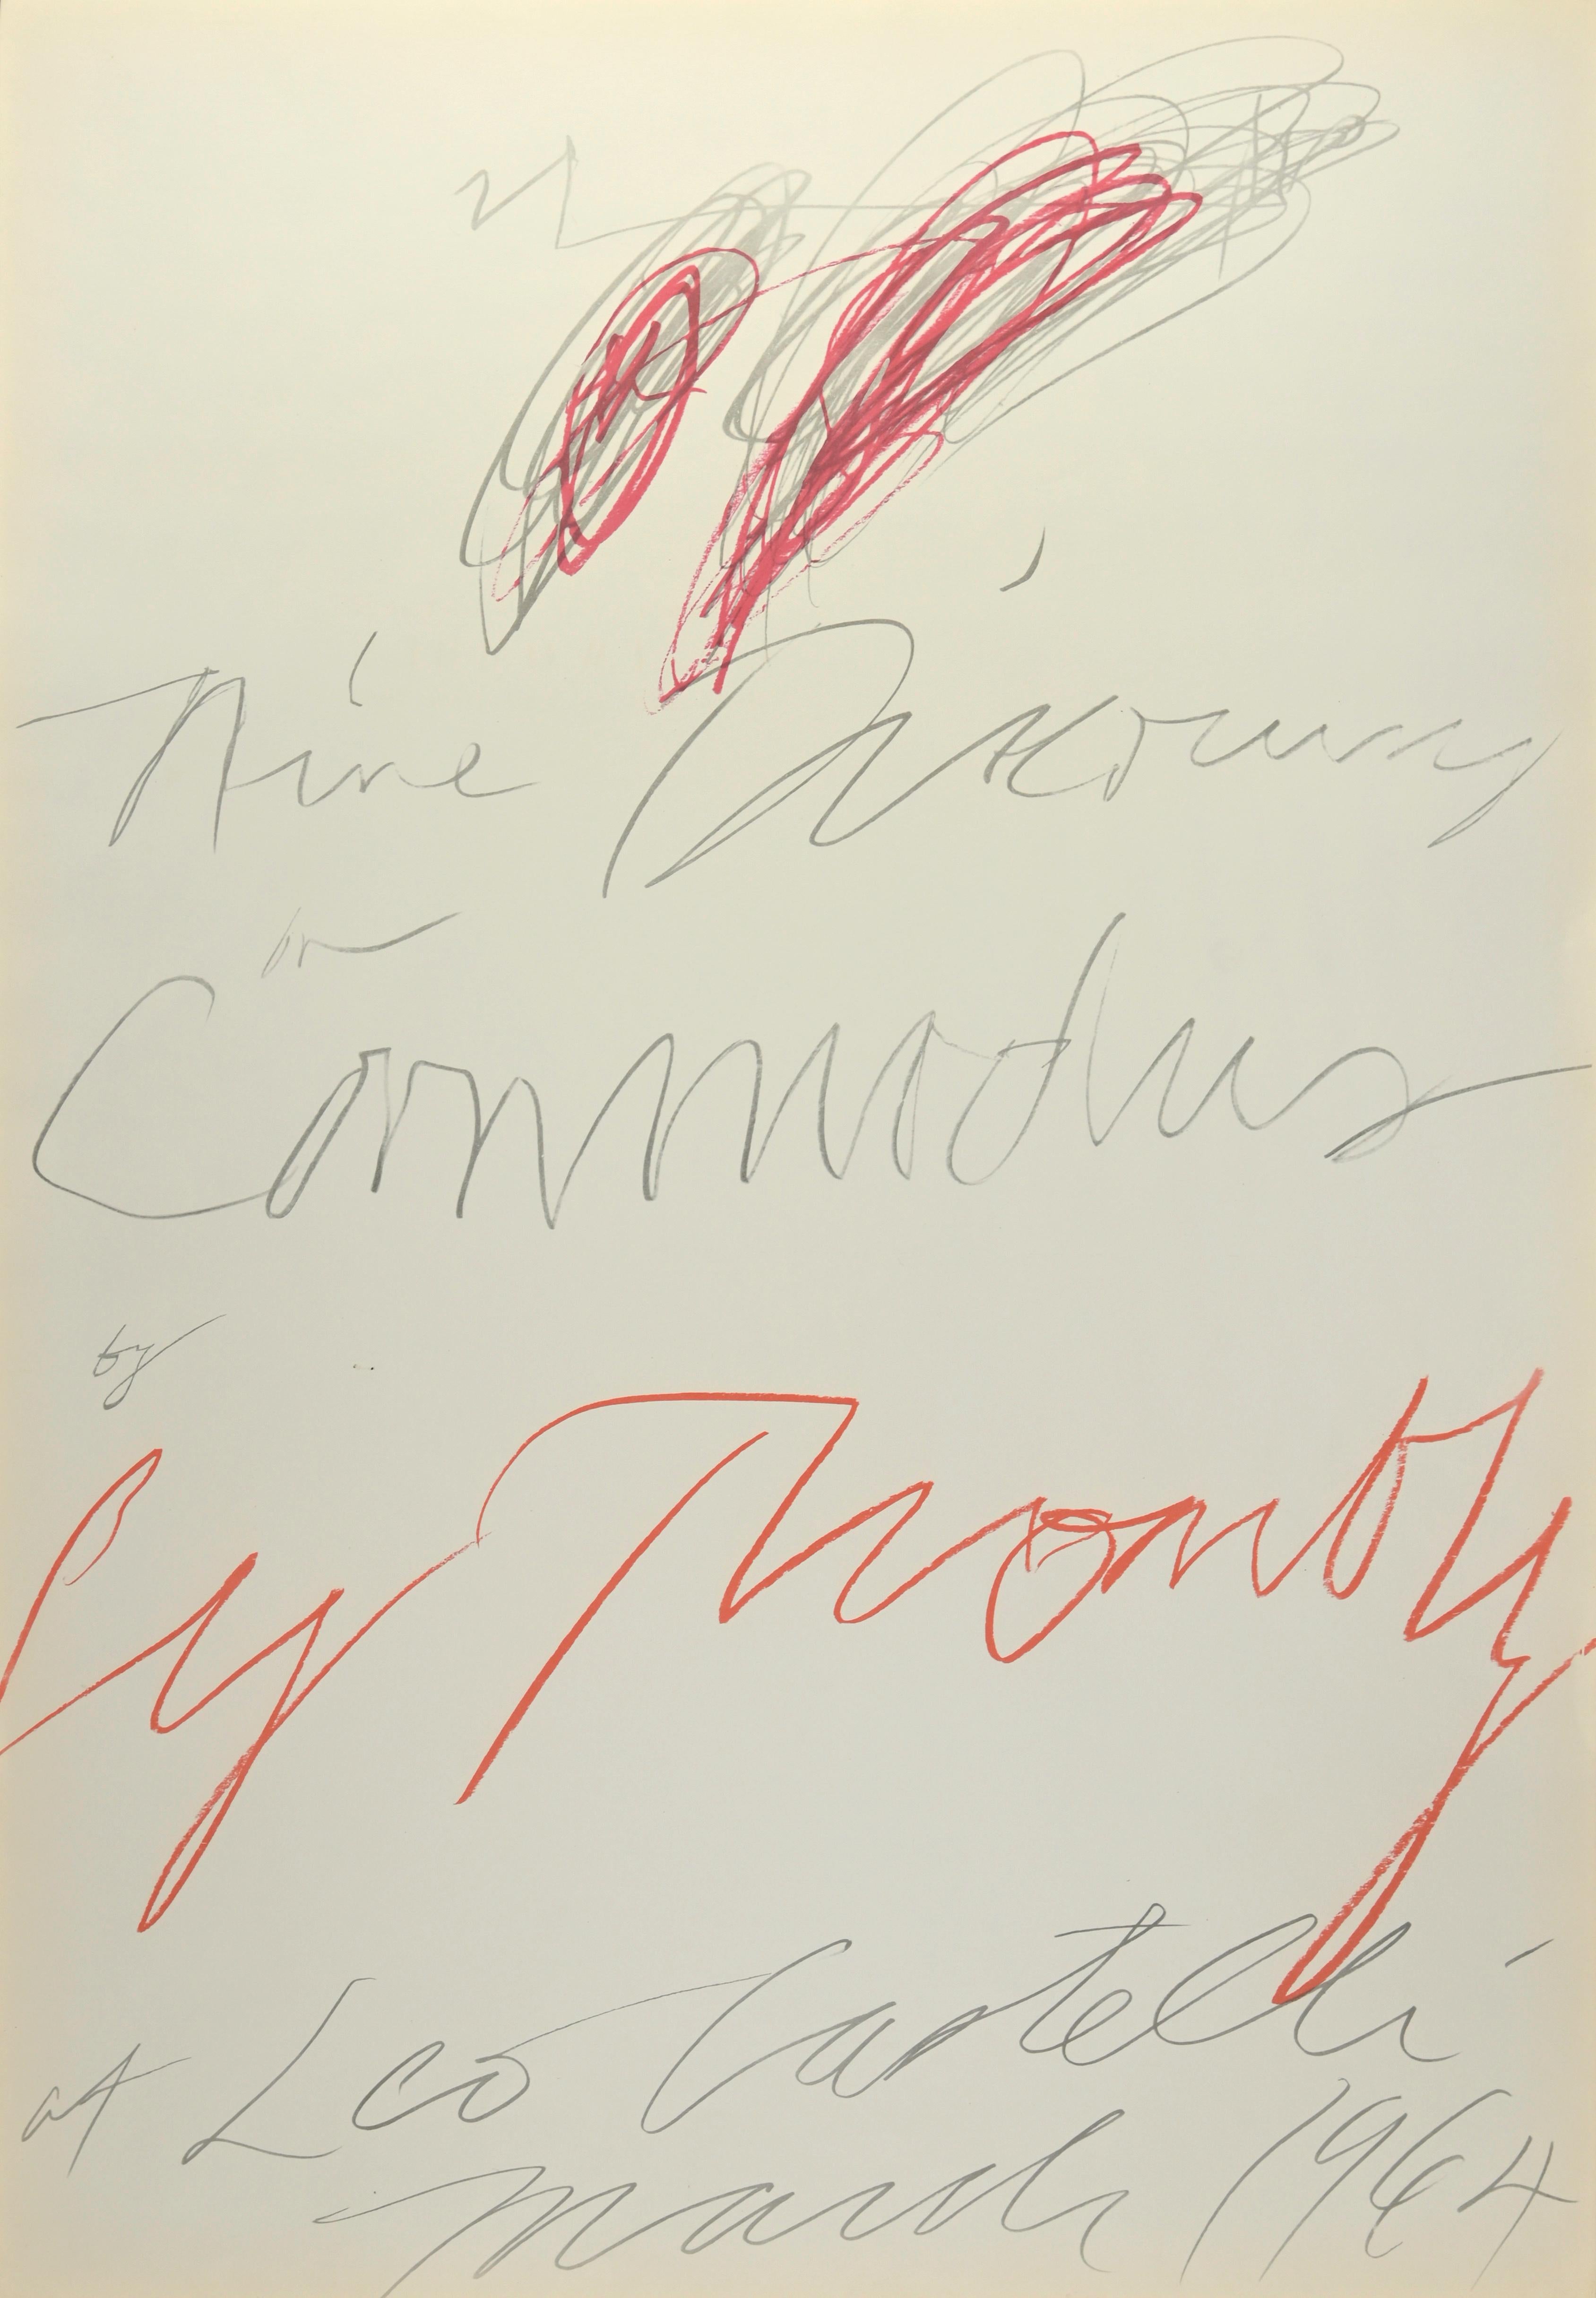 Poster study for nine discourses on Commodus by  Cy Twombly at Leo Castelli.

This is a lithograph of the poster that Cy Twombly realized for the exhibition “Nine discourses on Commodus”  (1964) at the Leo Castelli Gallery in New York City, where